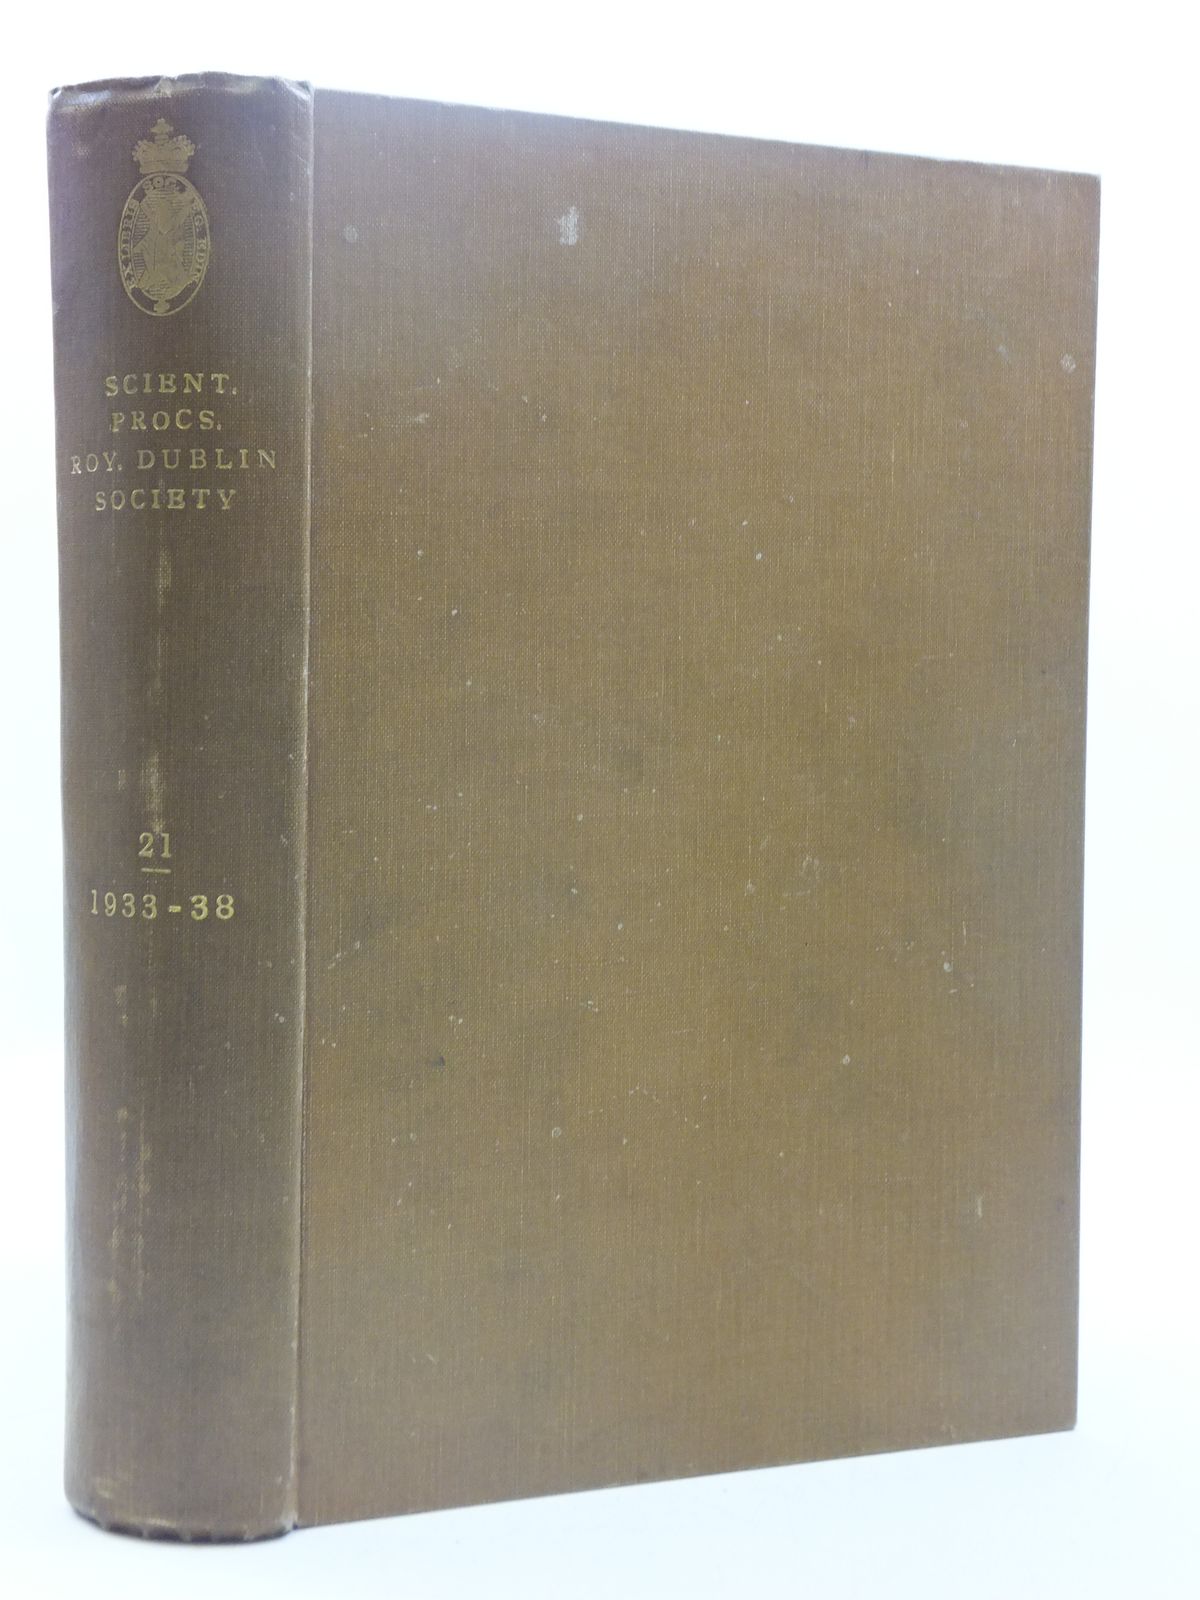 Photo of THE SCIENTIFIC PROCEEDINGS OF THE ROYAL DUBLIN SOCIETY VOLUME 21 (1933-1938) published by Royal Dublin Society (STOCK CODE: 1605207)  for sale by Stella & Rose's Books